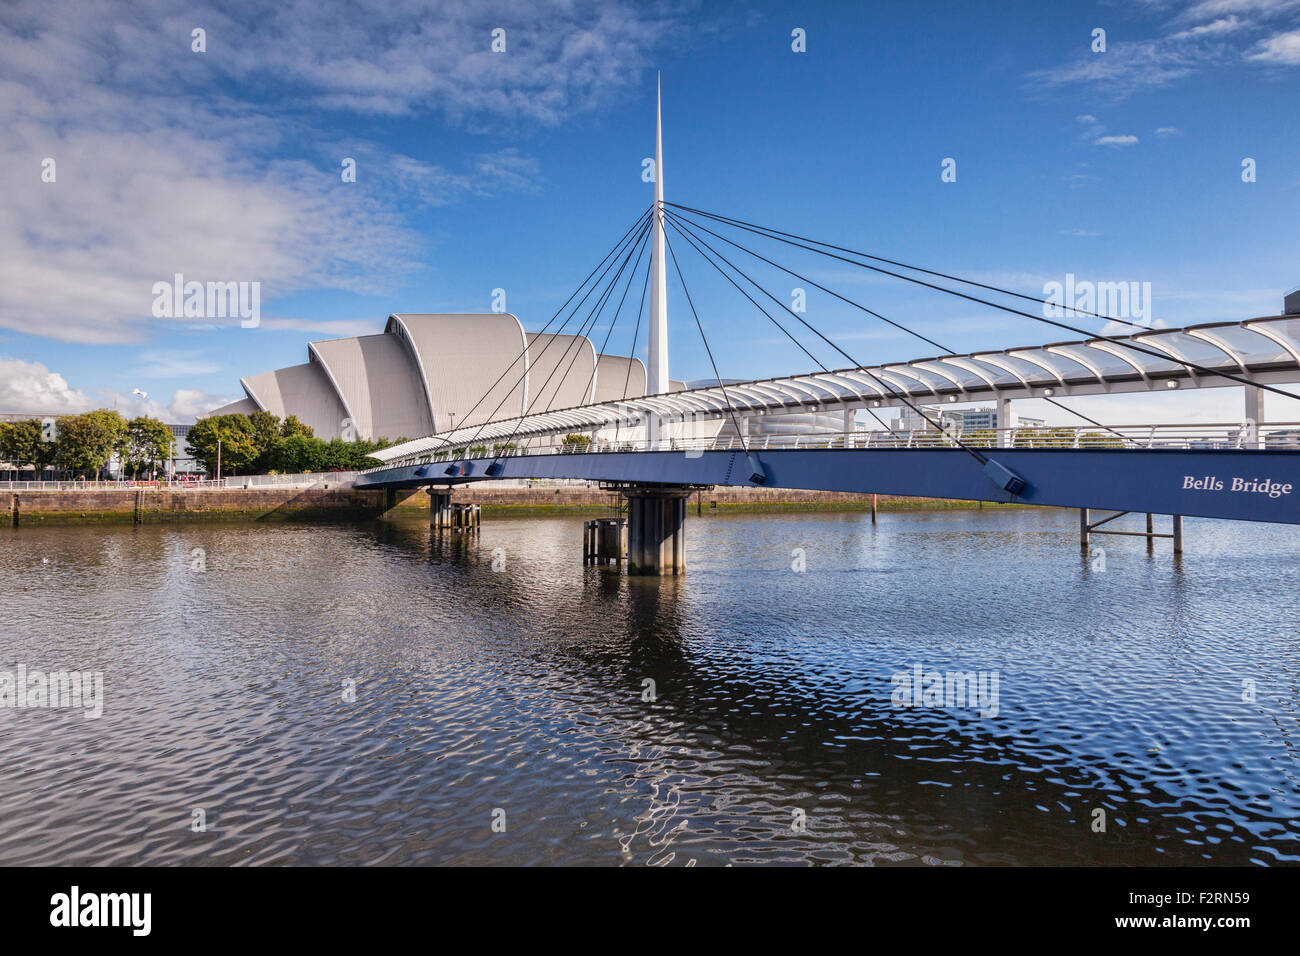 Bells Bridge and the SECC - the Scottish Exhibition and Conference Centre, known as the Armadillo, designed by Sir Norman Foster Stock Photo